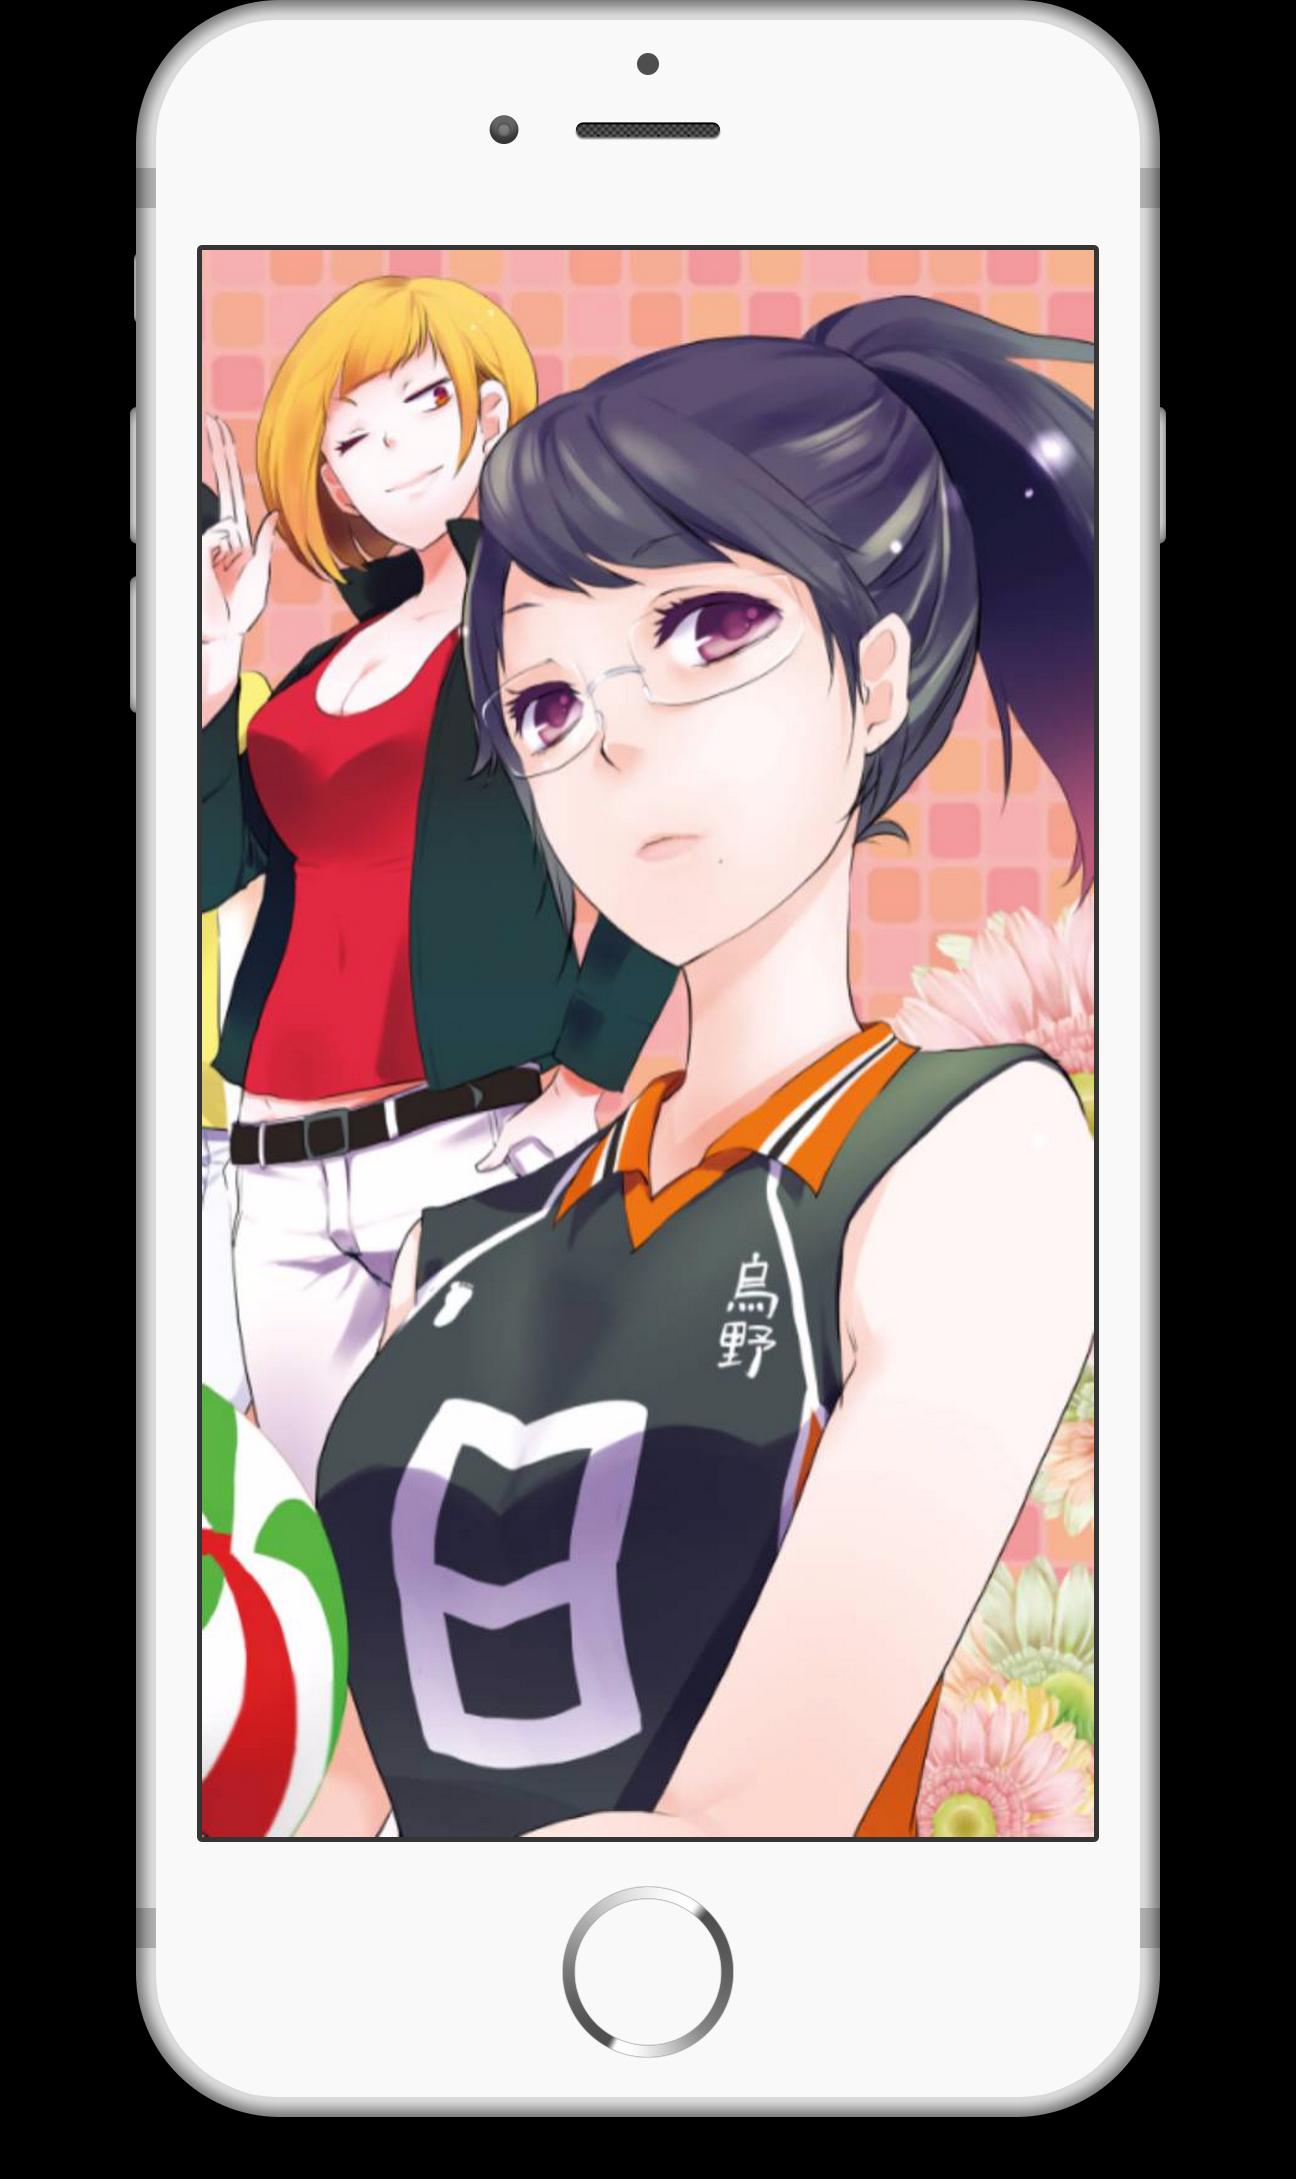 Haikyuu Anime Wallpaper HD 2018 for Android - APK Download